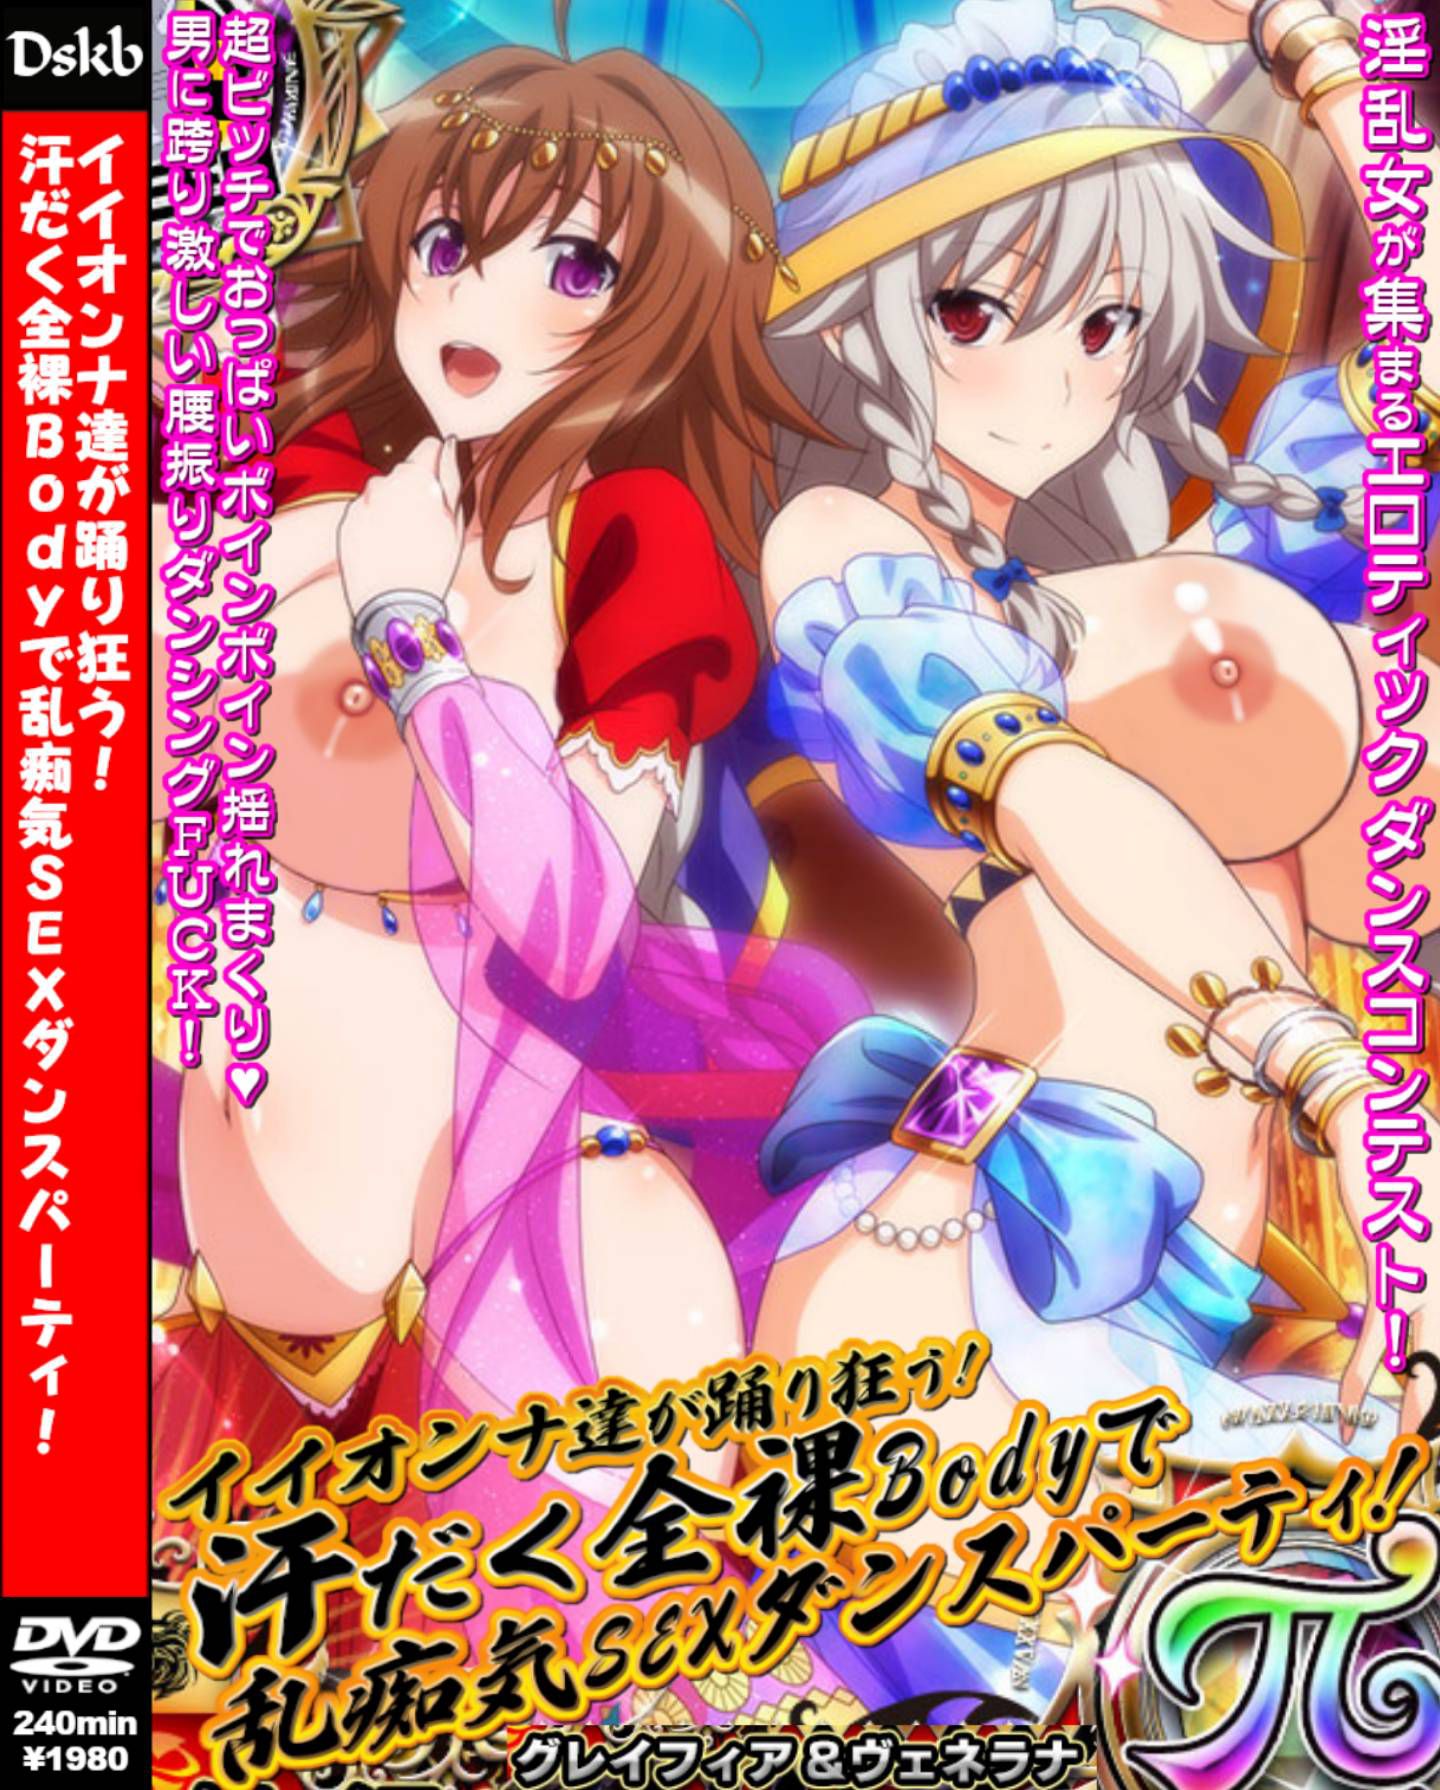 【AV Paquekora】 Anime characters that have been made into AV packages and magazine covers Part 74 51